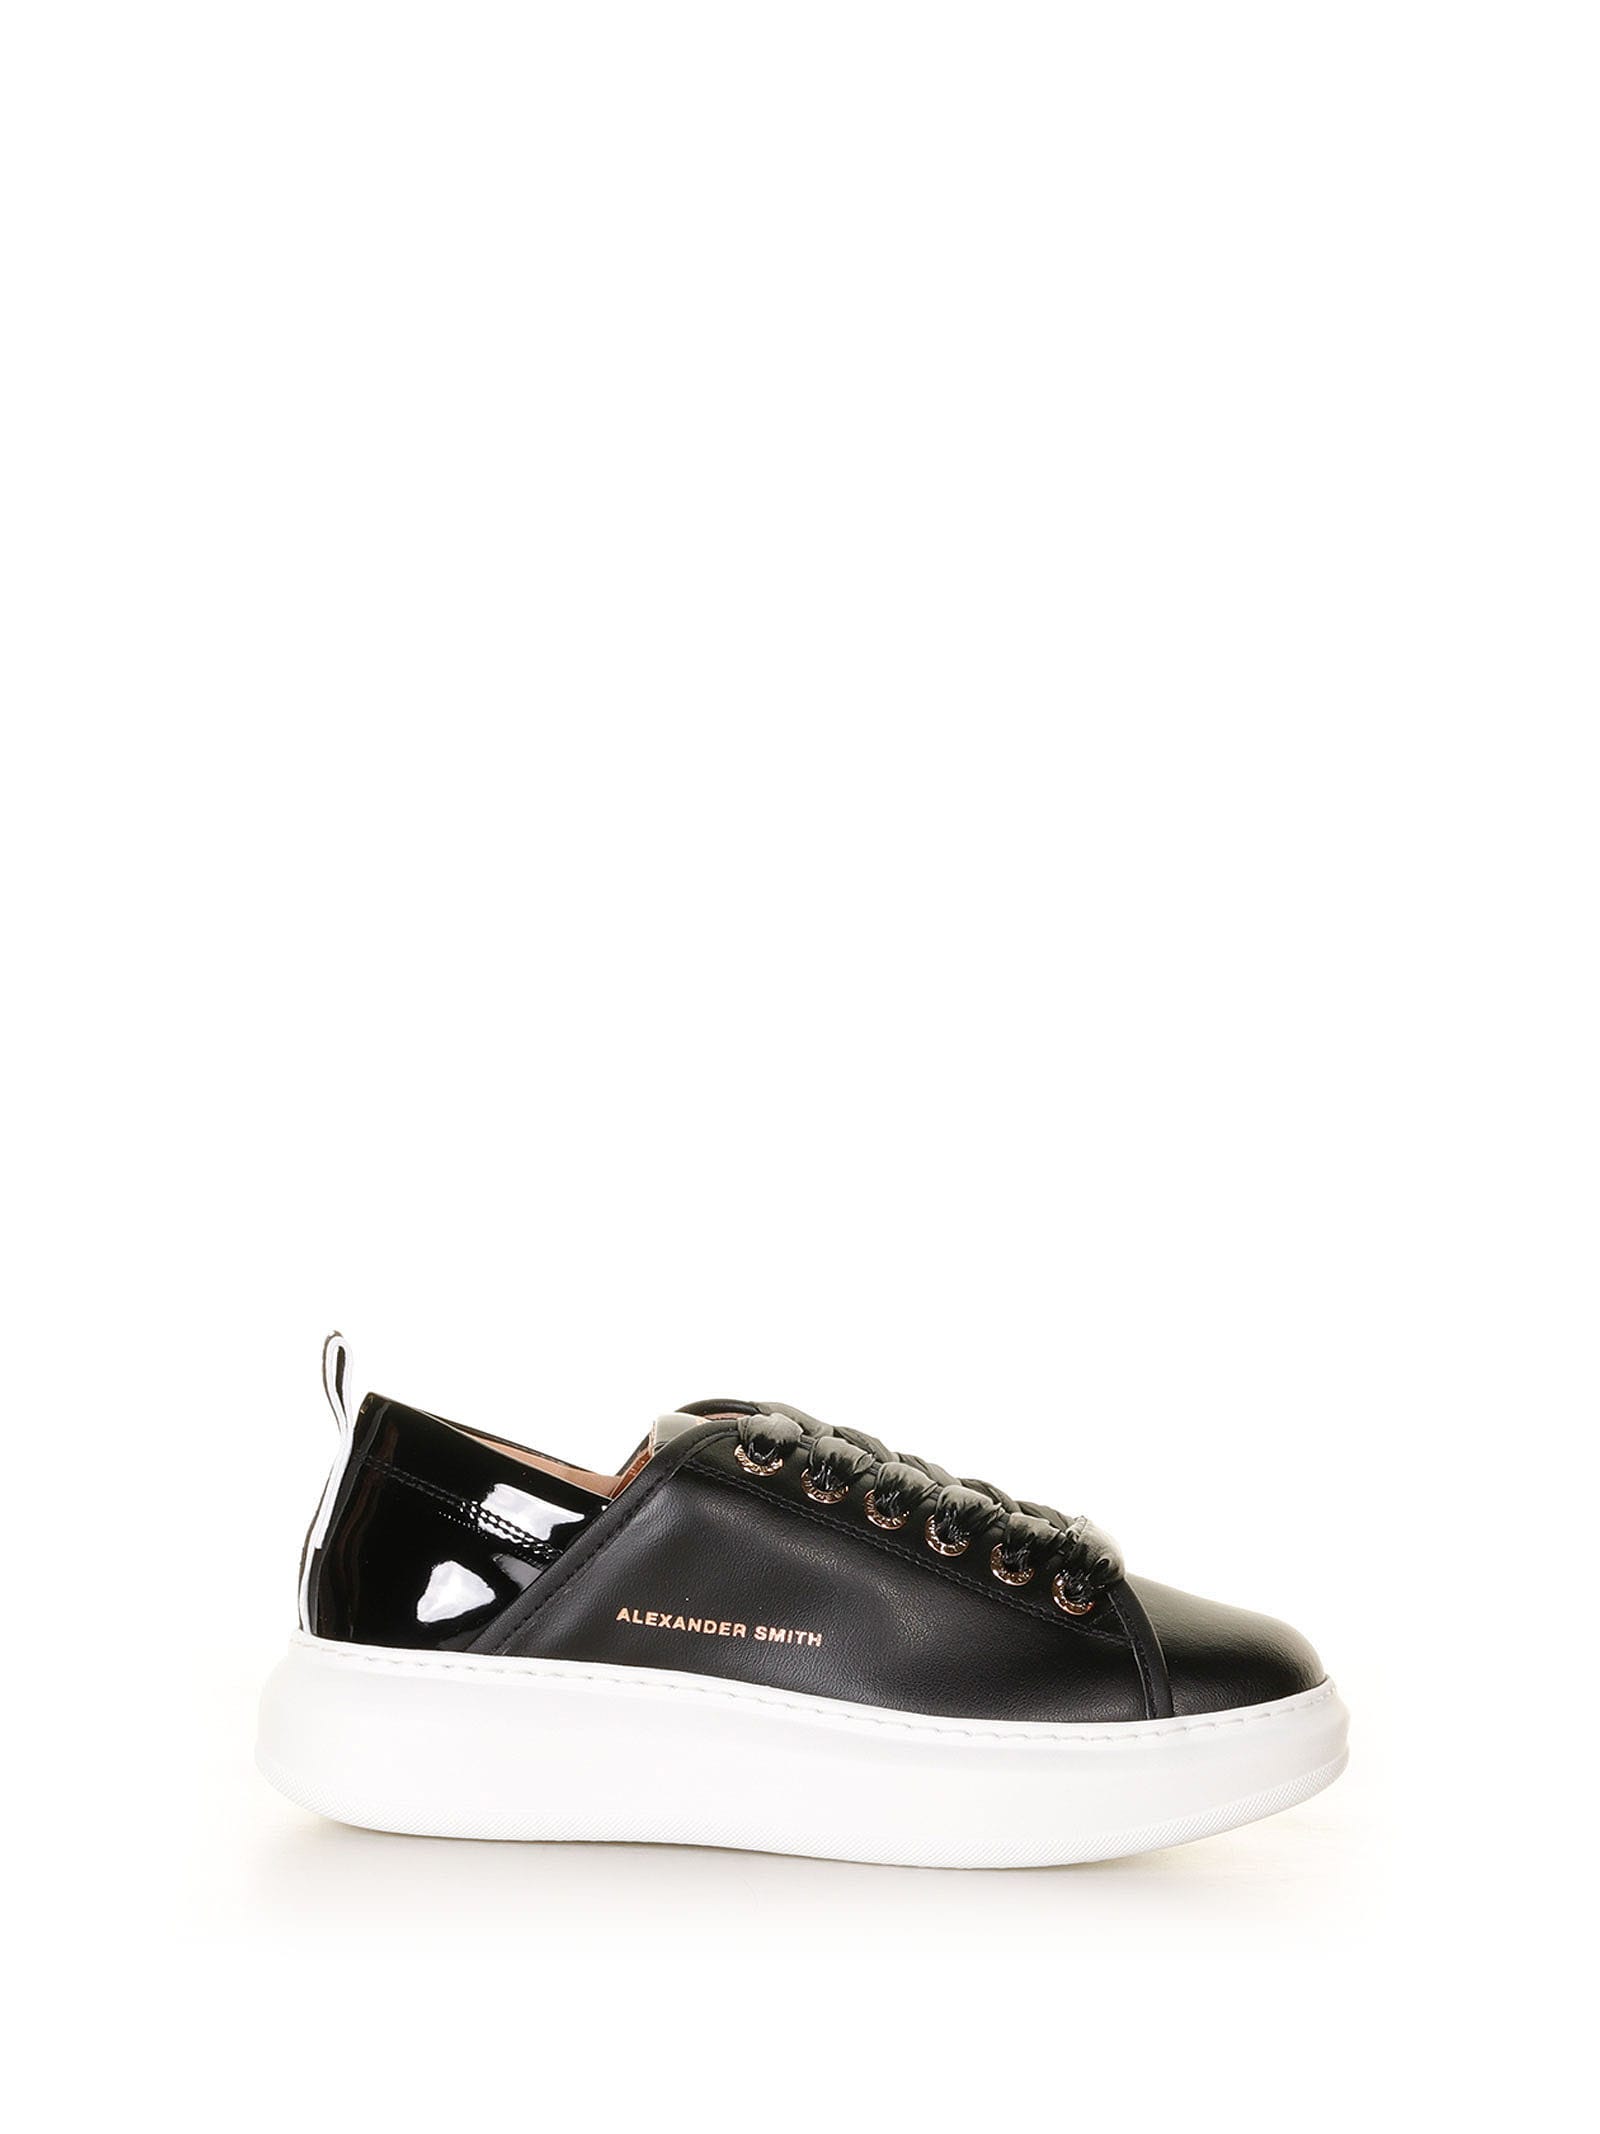 Alexander Smith Wembley Sneaker In Black Leather